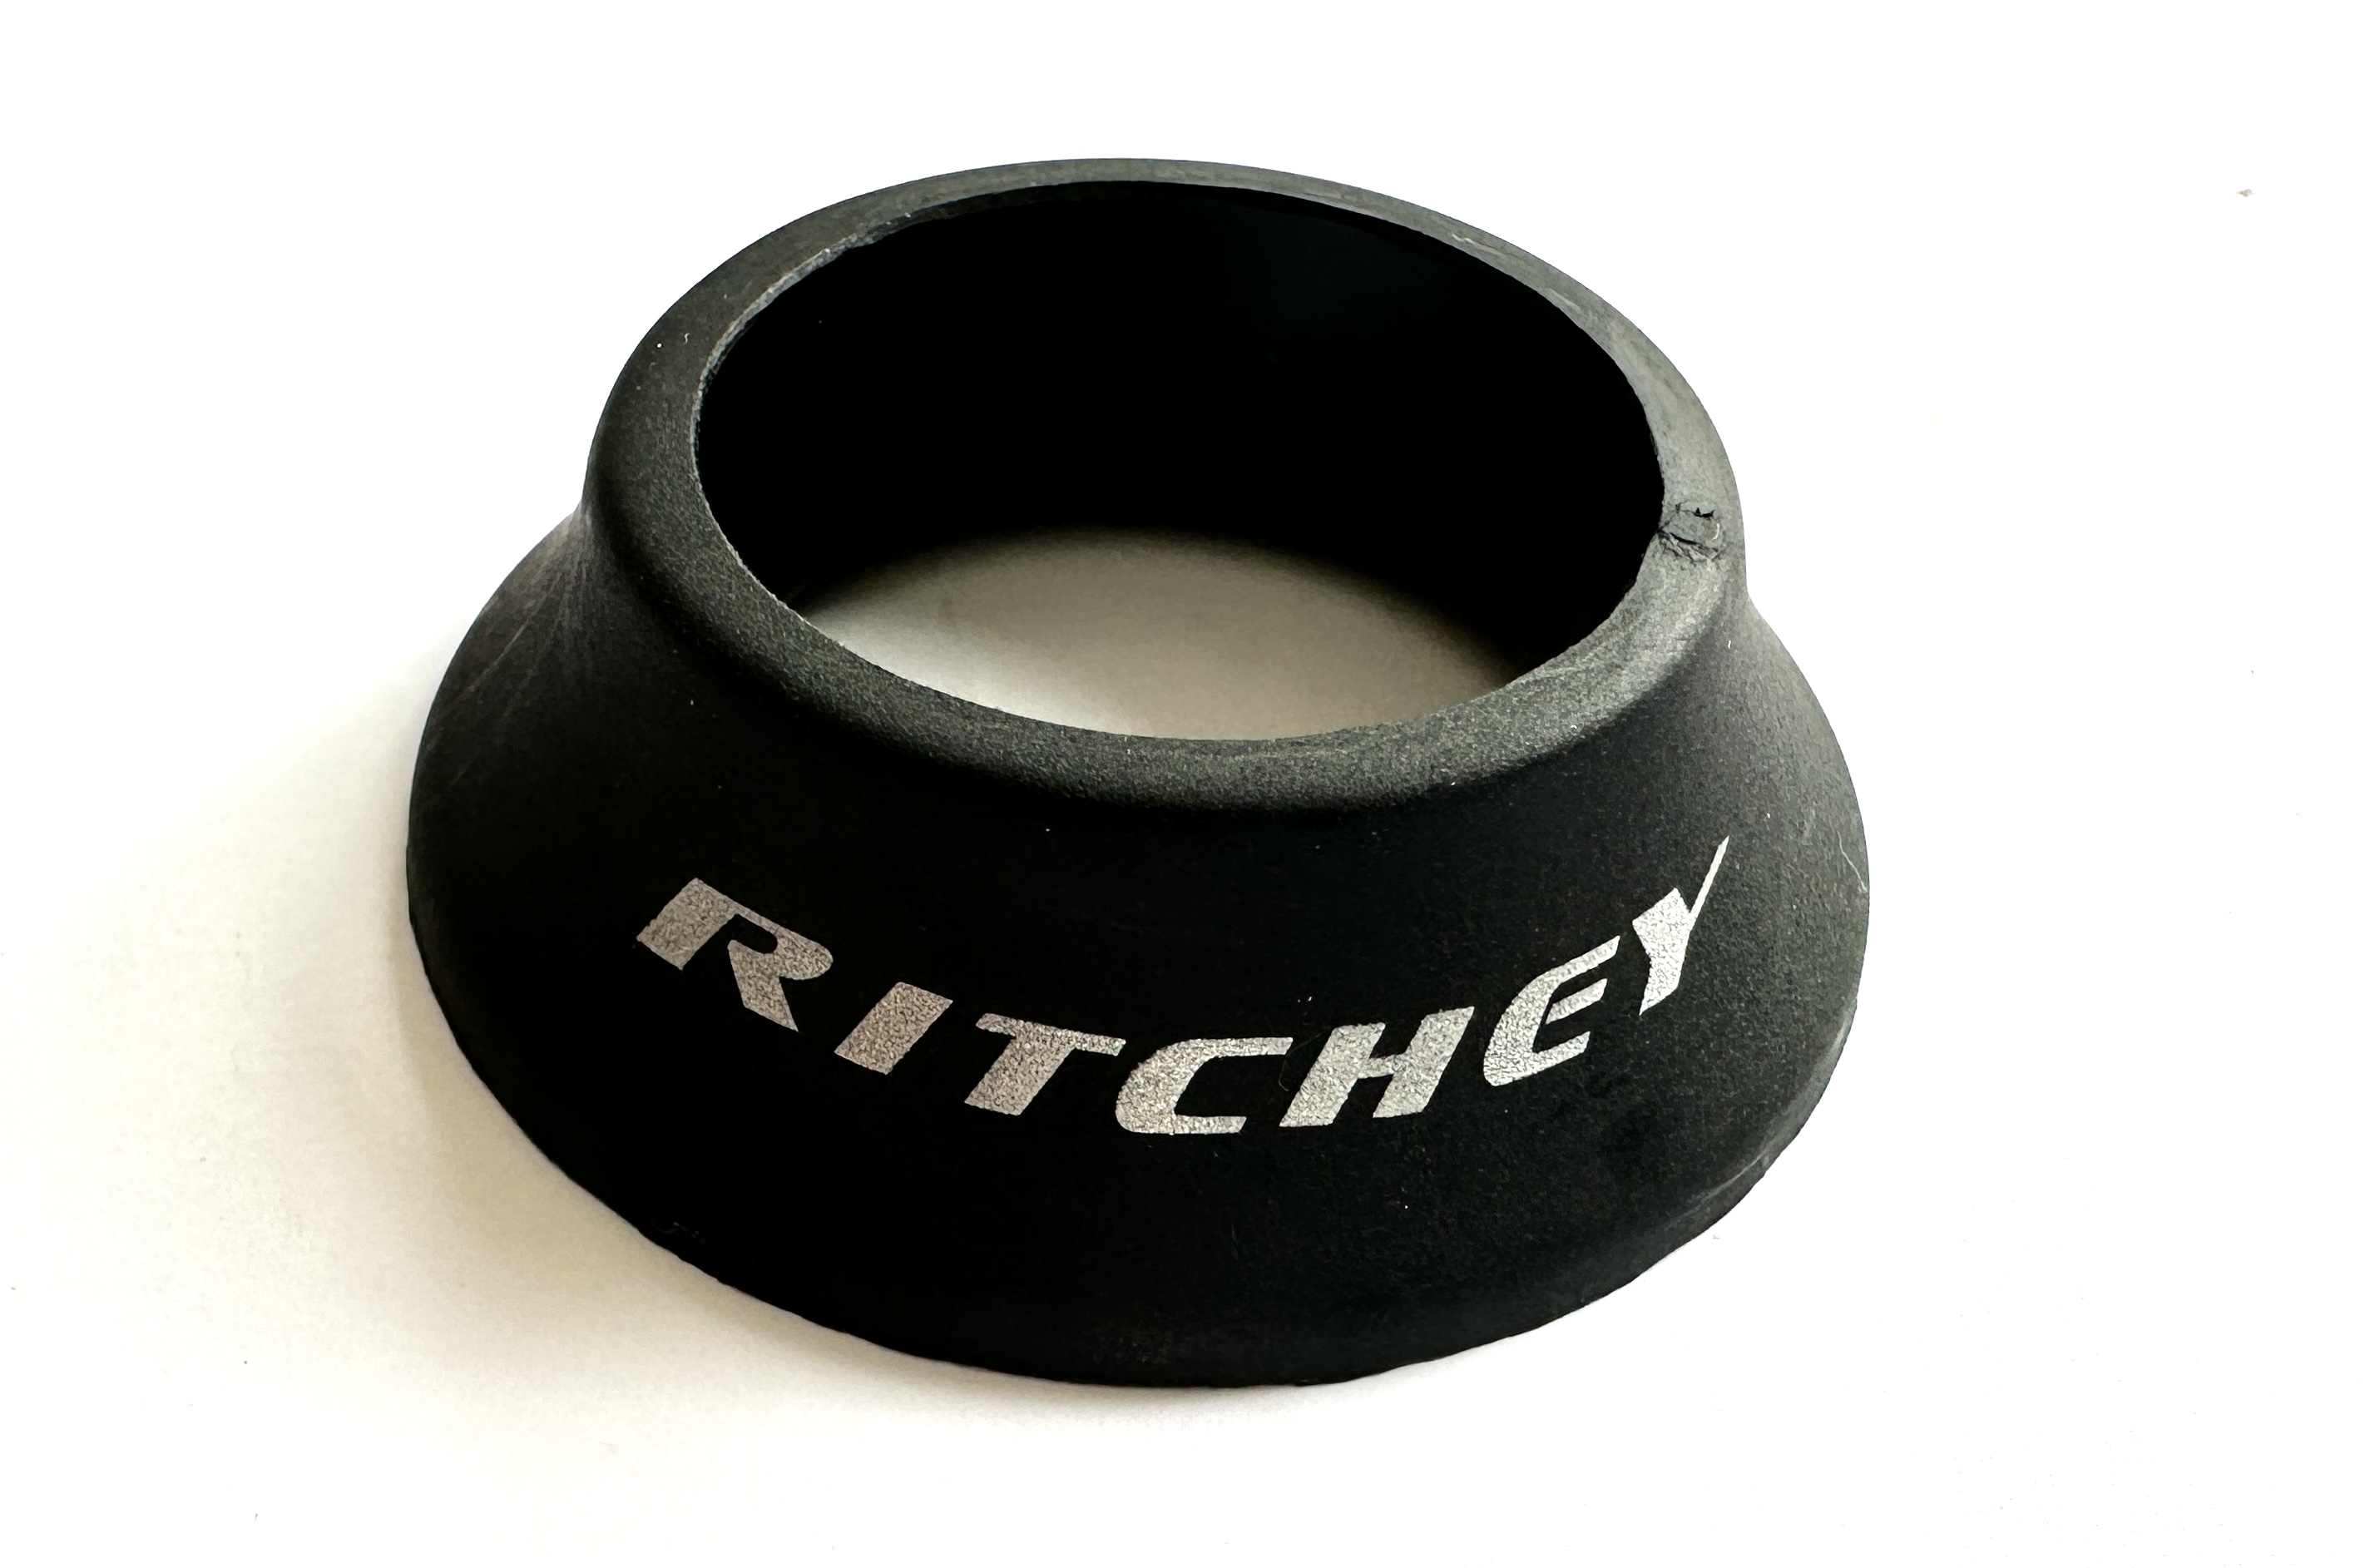 Conical spacer from Ritchey for semi-integrated headsets.